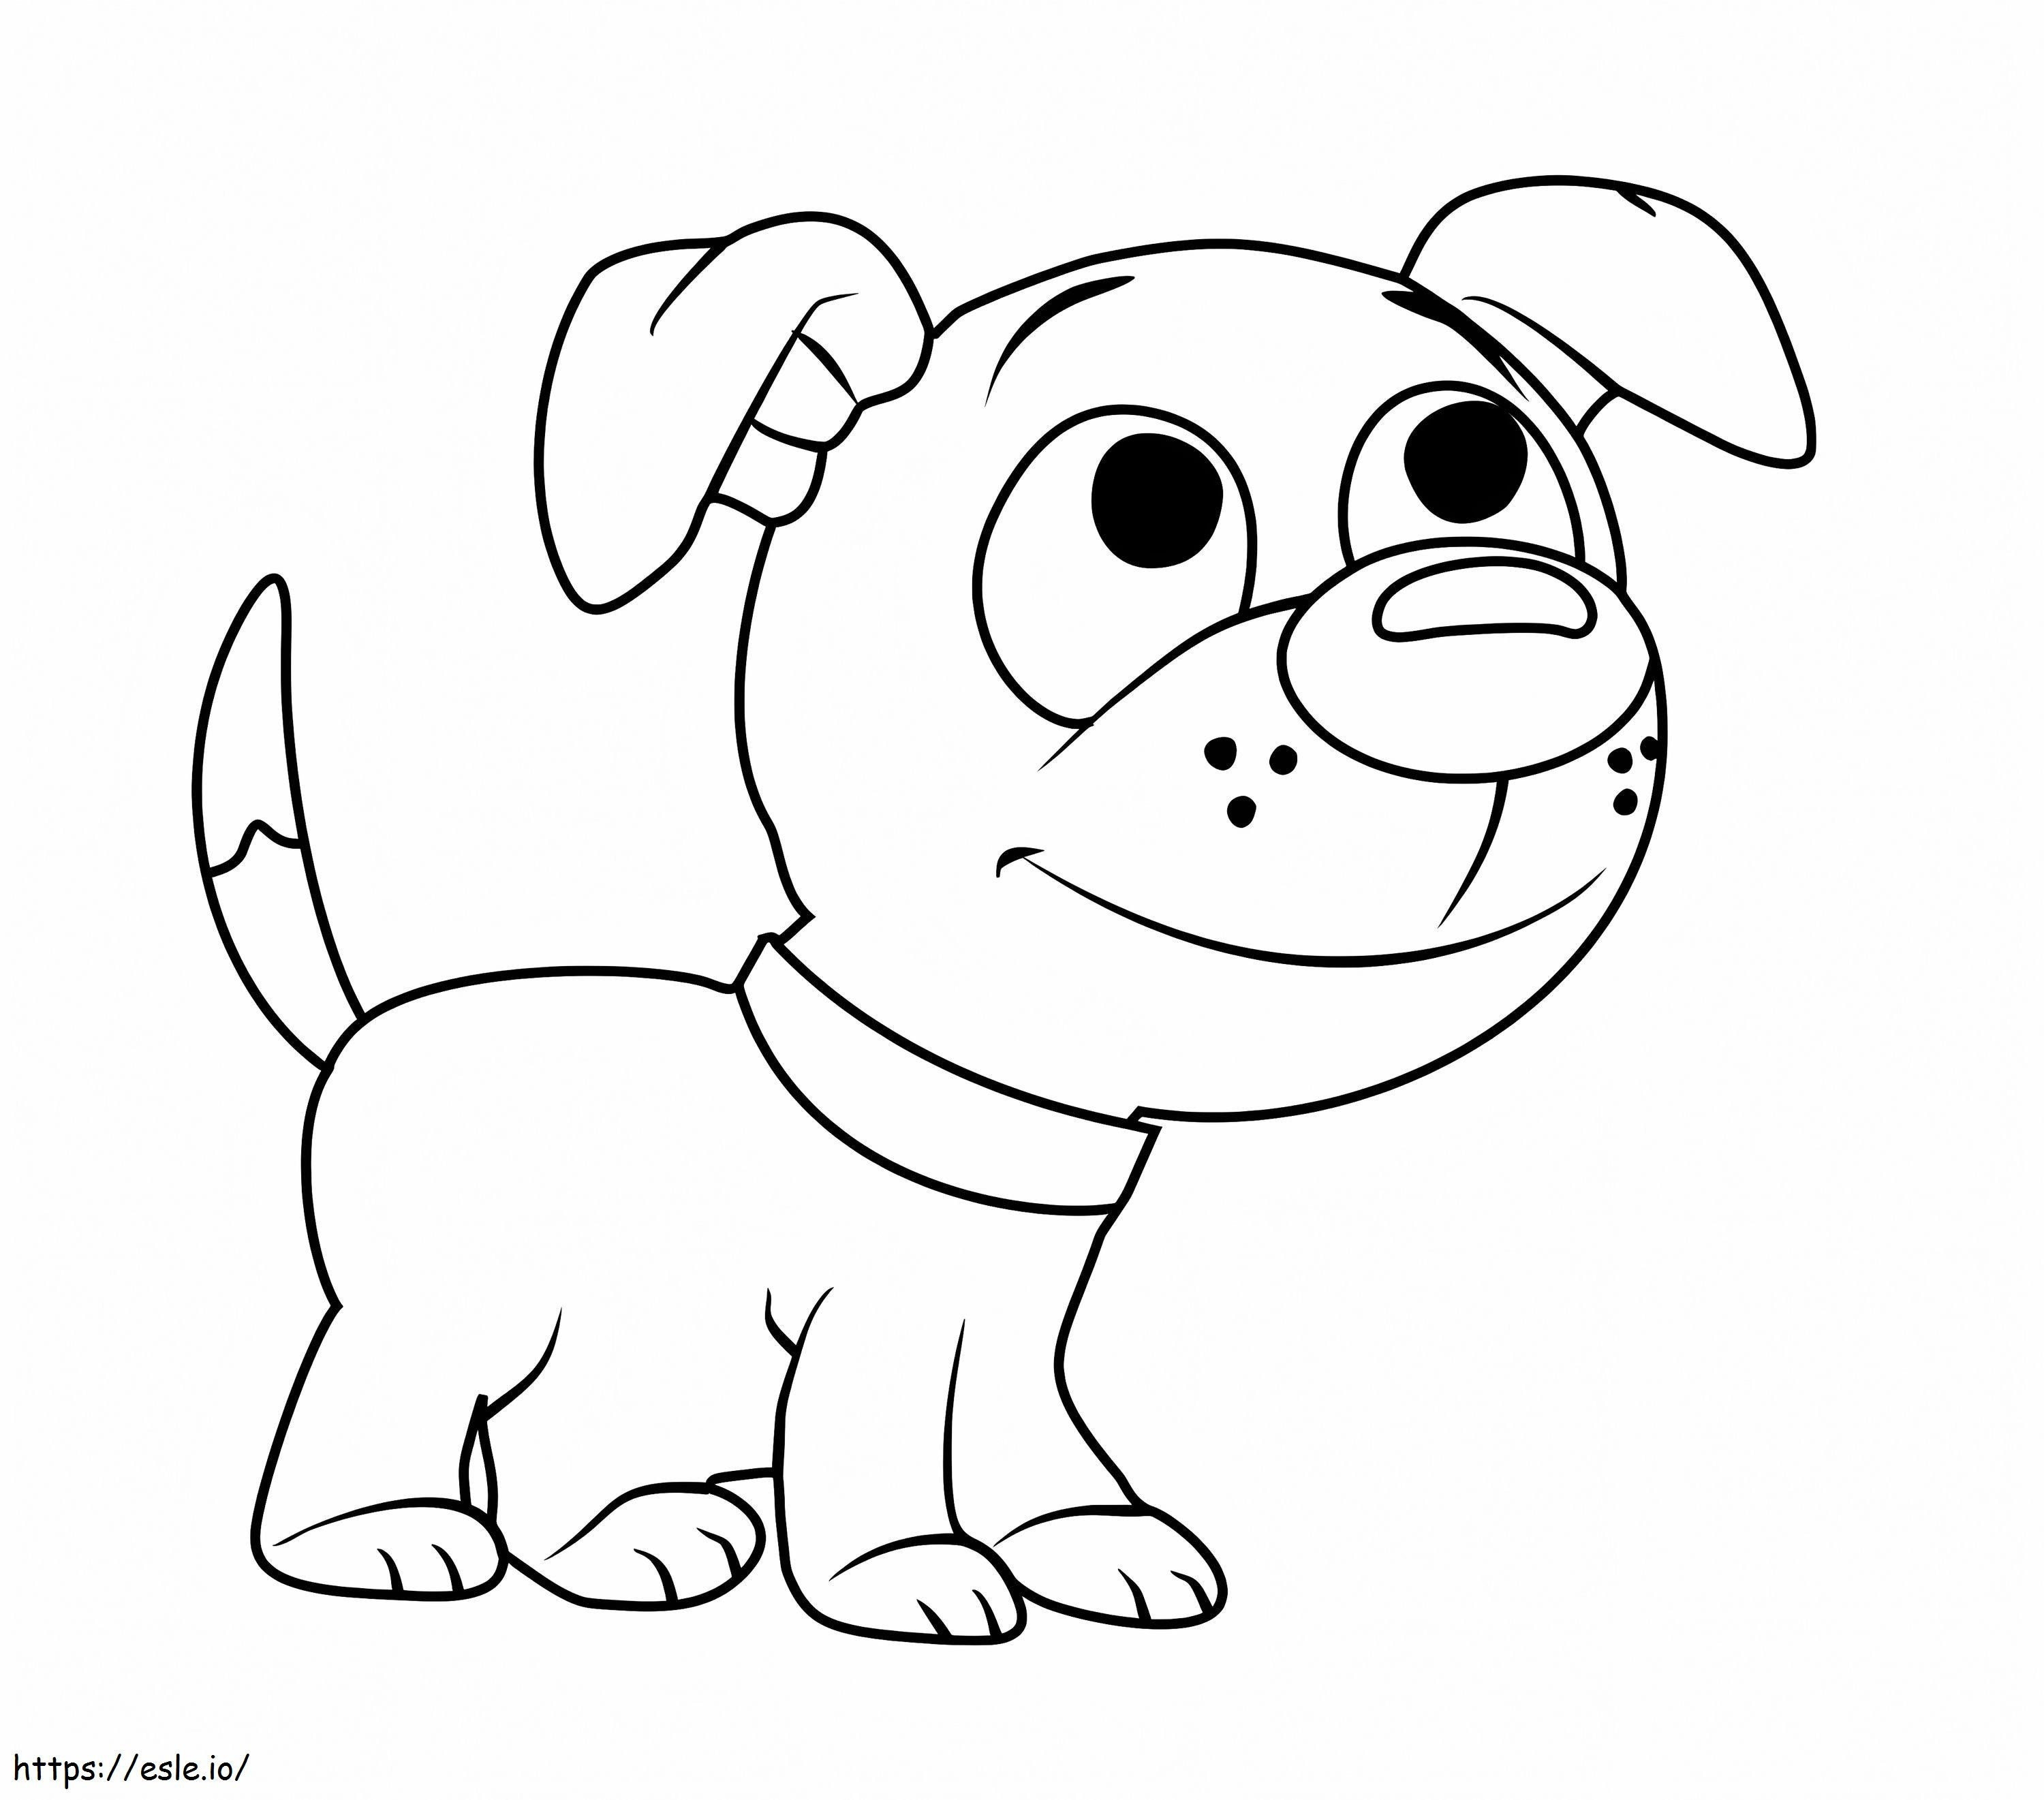 Wagster From Pound Puppies coloring page